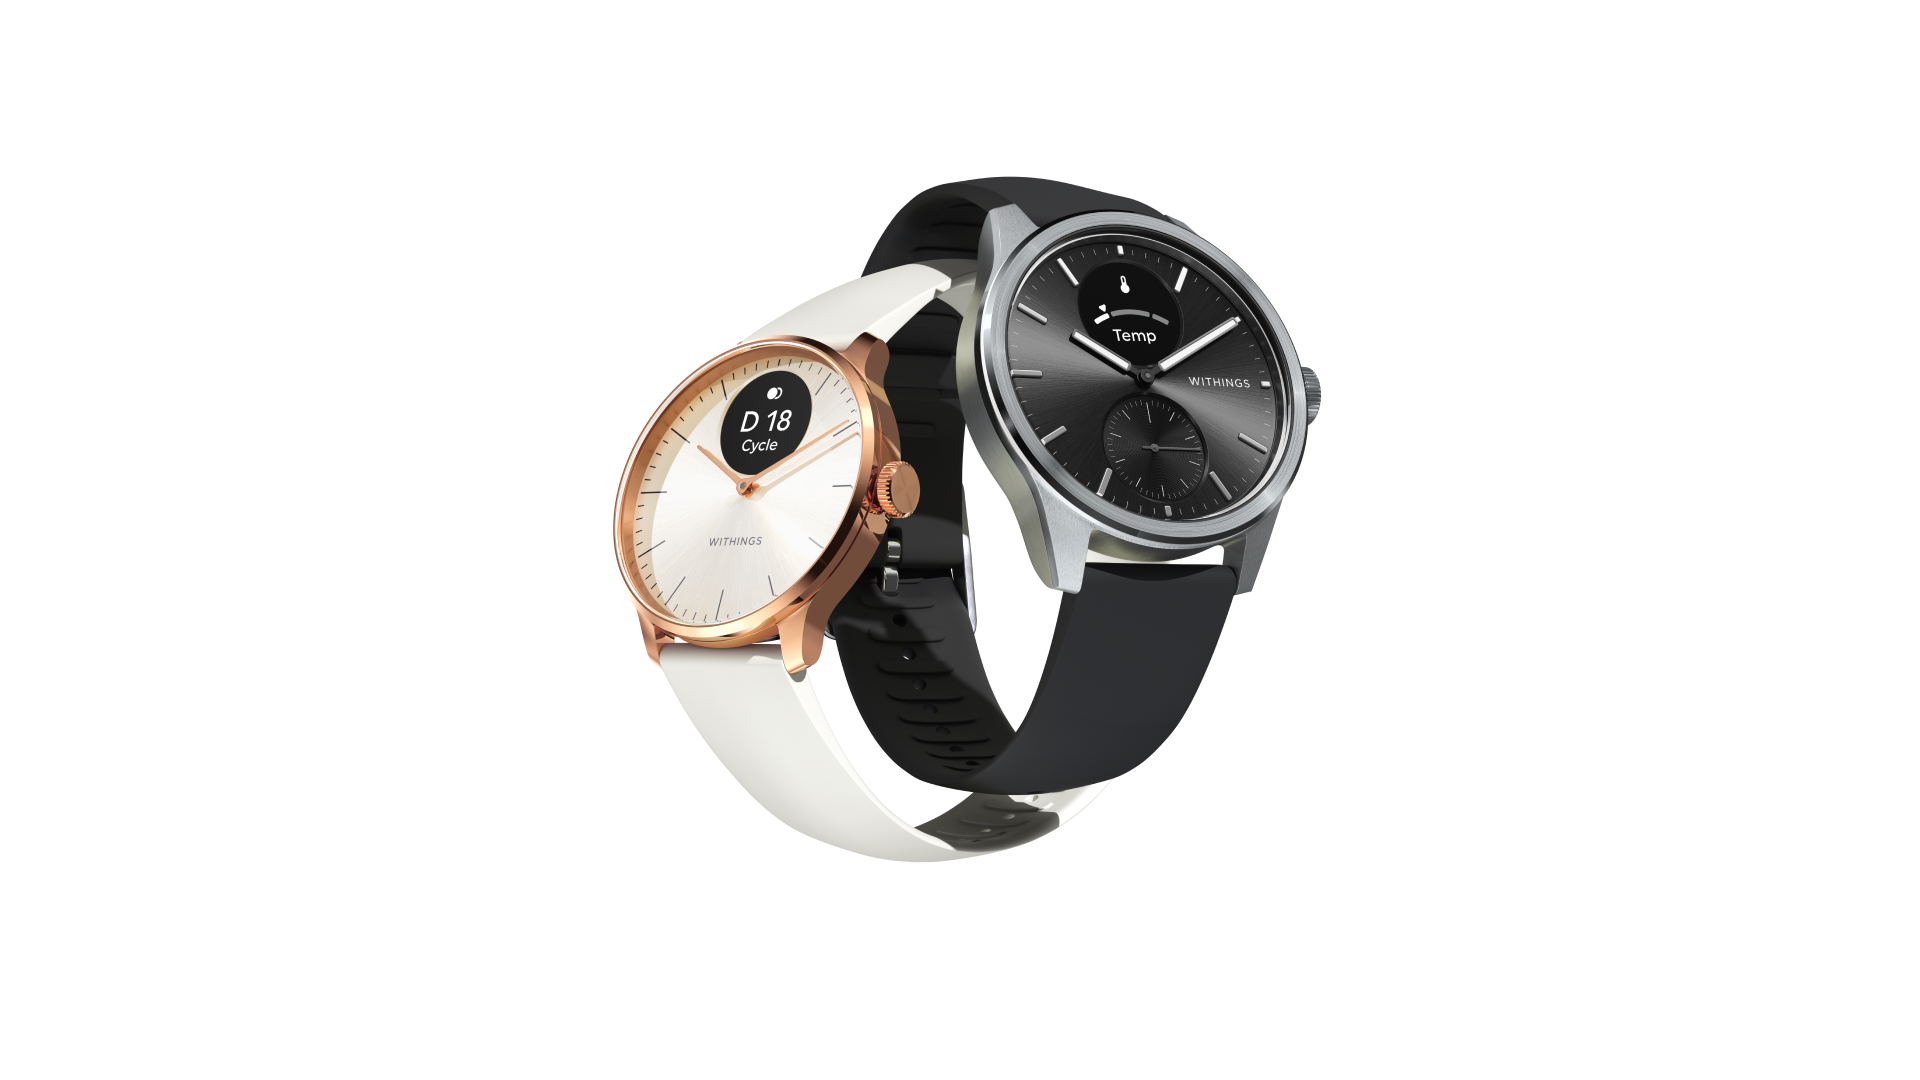 Withings ScanWatch 2 and ScanWatch Light